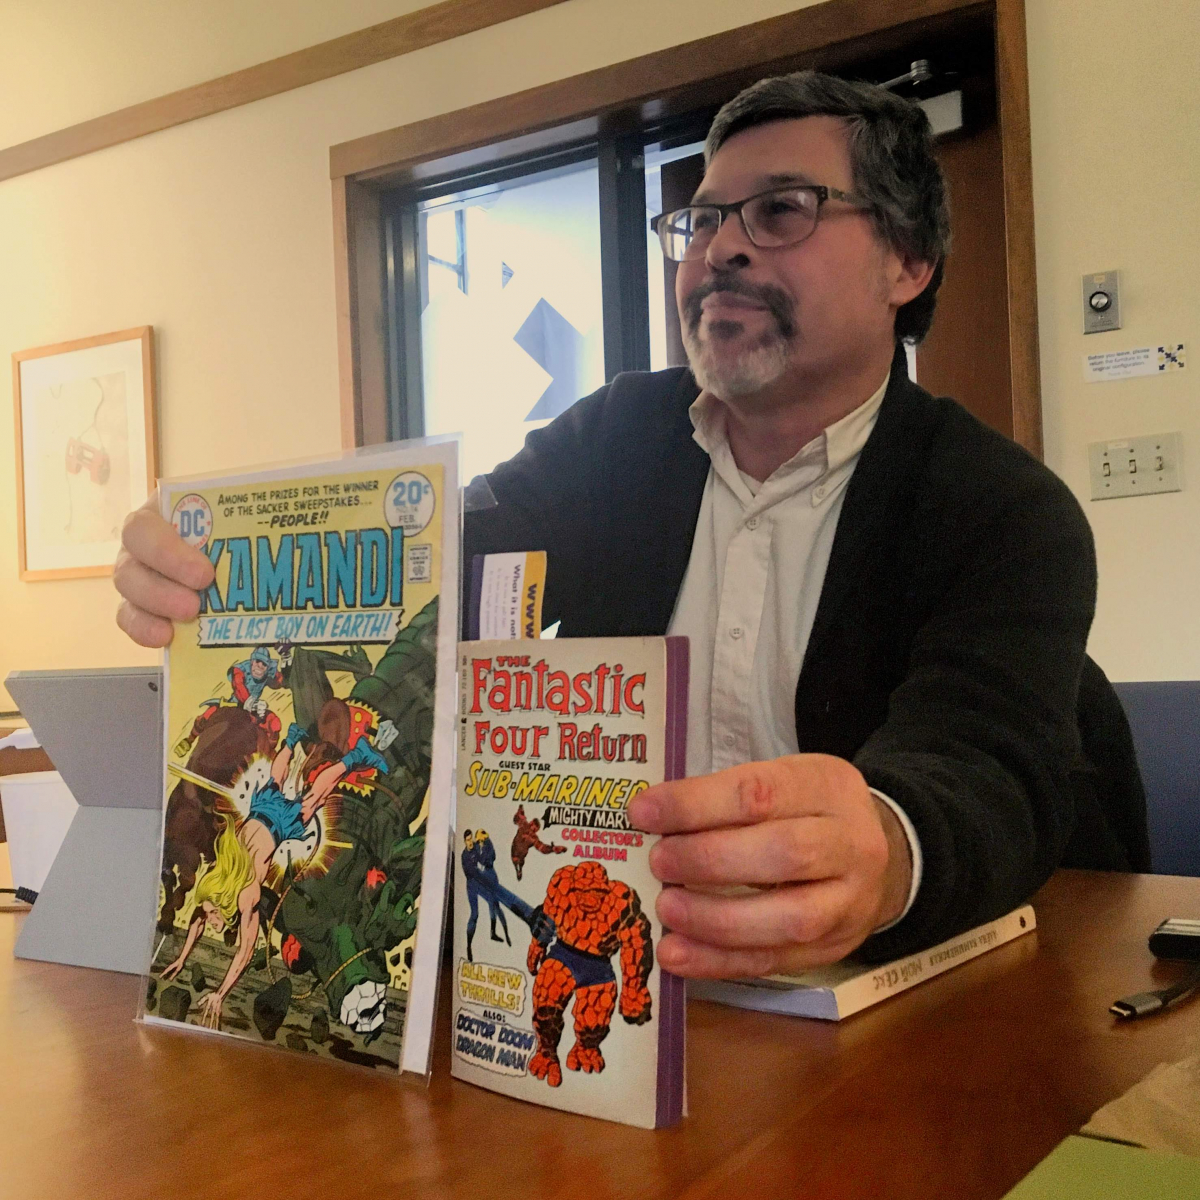 José Alaniz sits at a table holding two comic books.